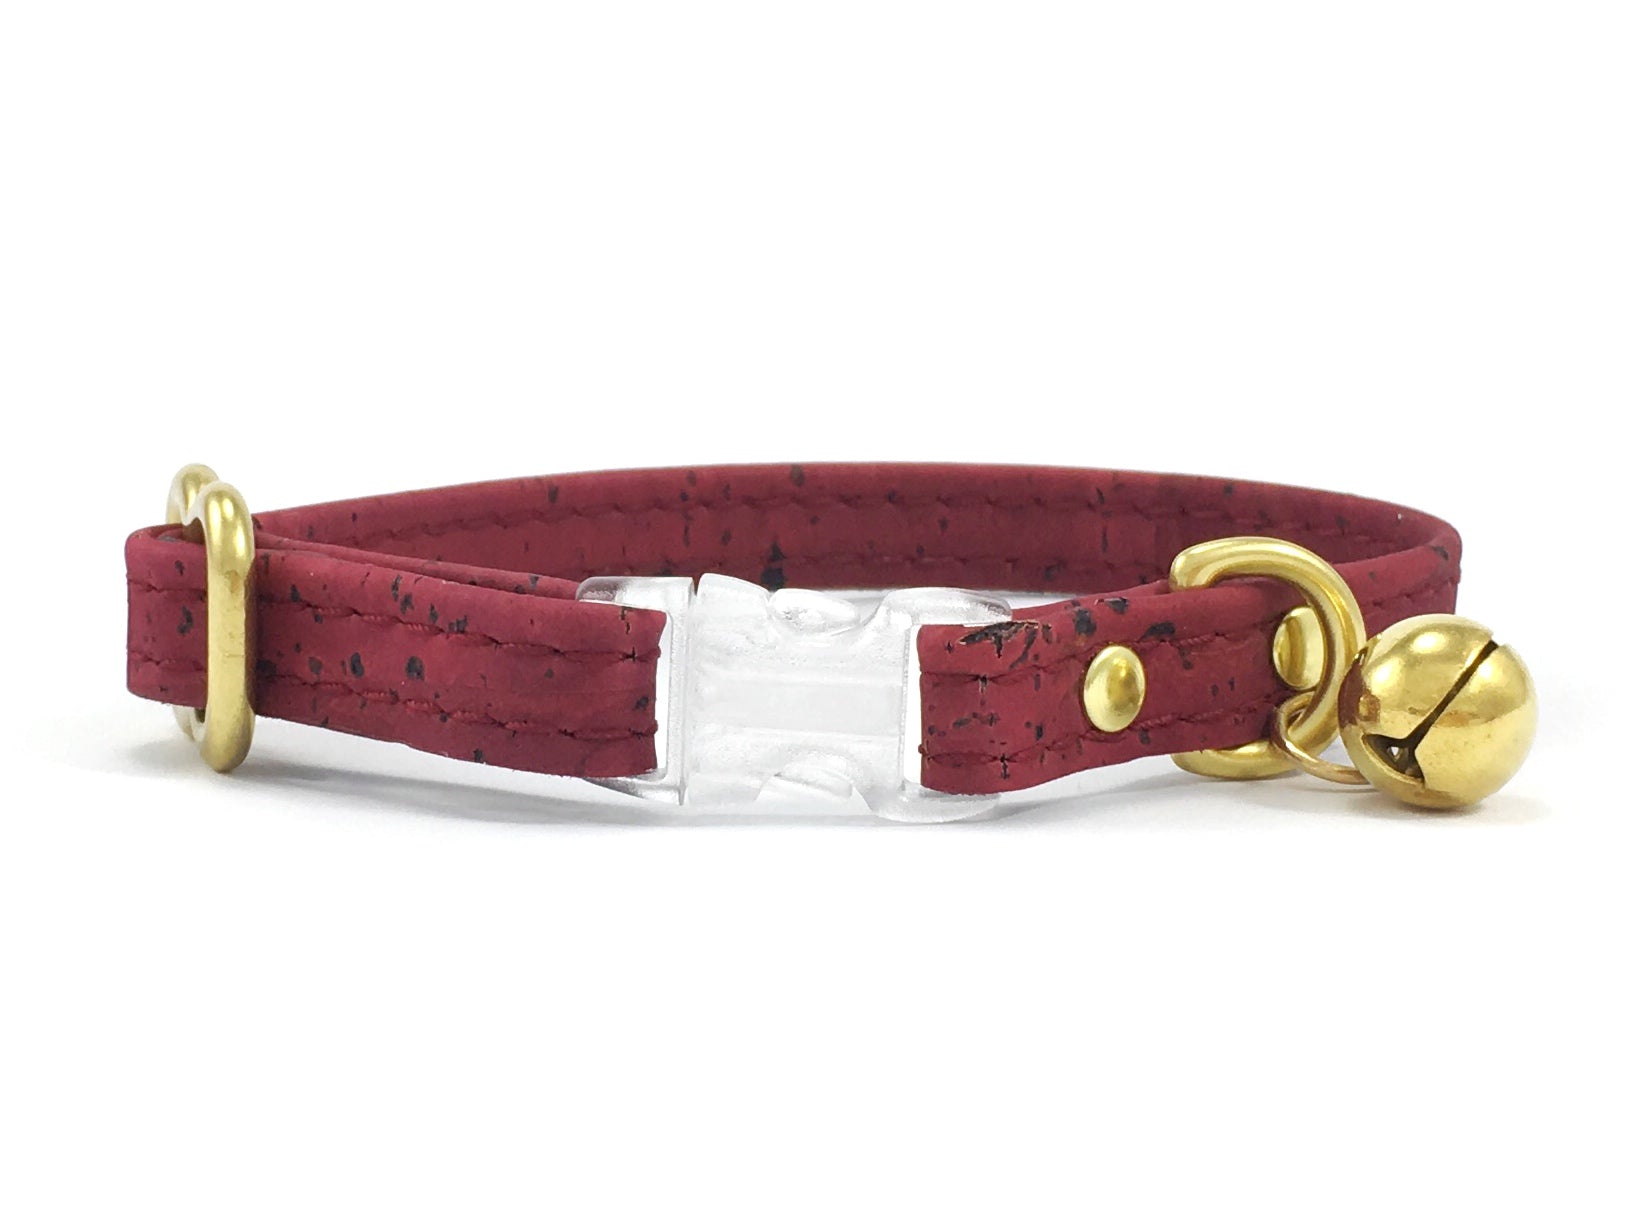 Burgundy cat collar in vegan cork leather with breakaway safety buckle and solid brass bell